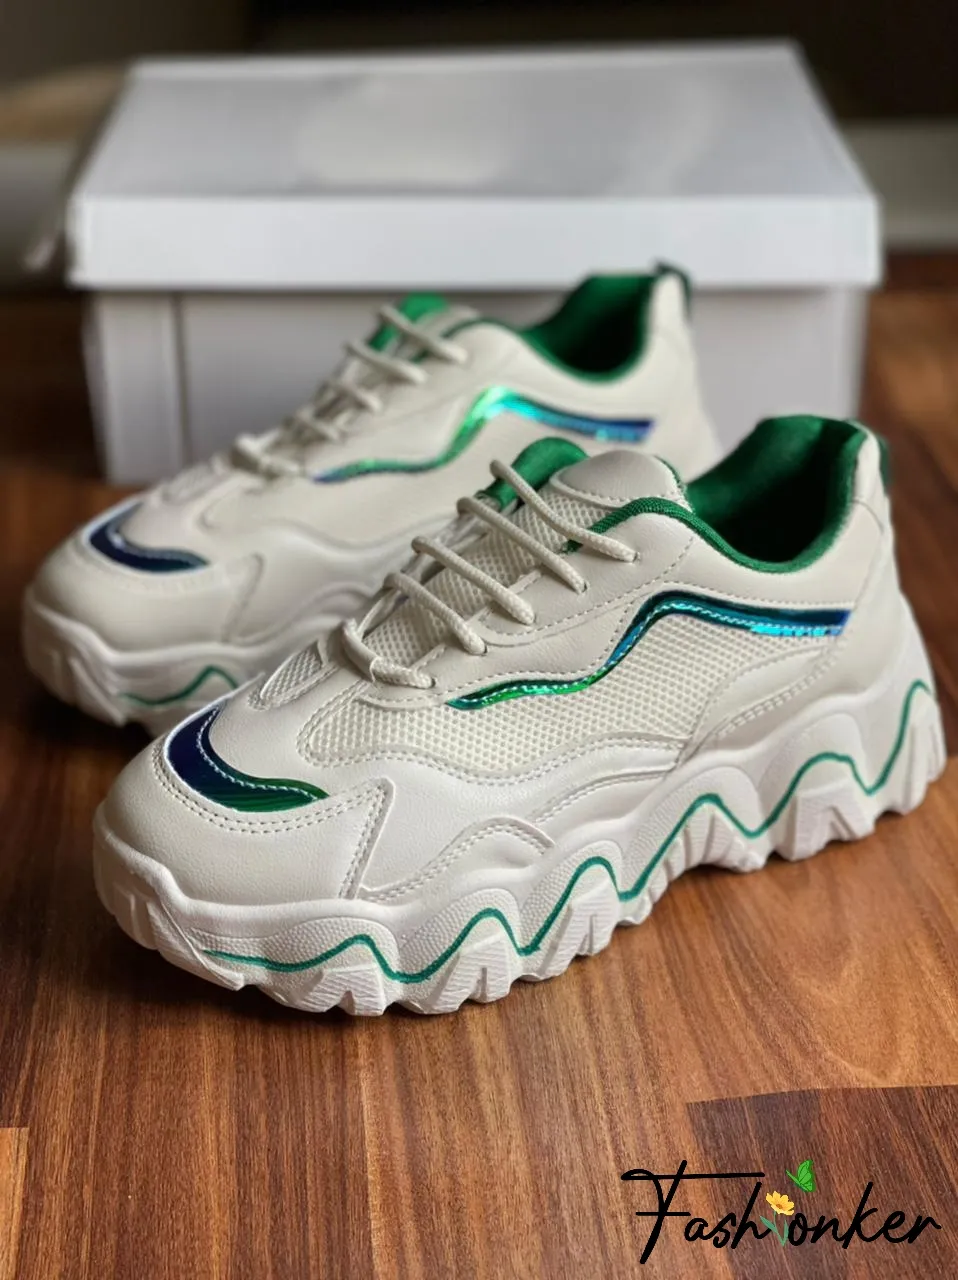 Best Price Green Wave Highshoes